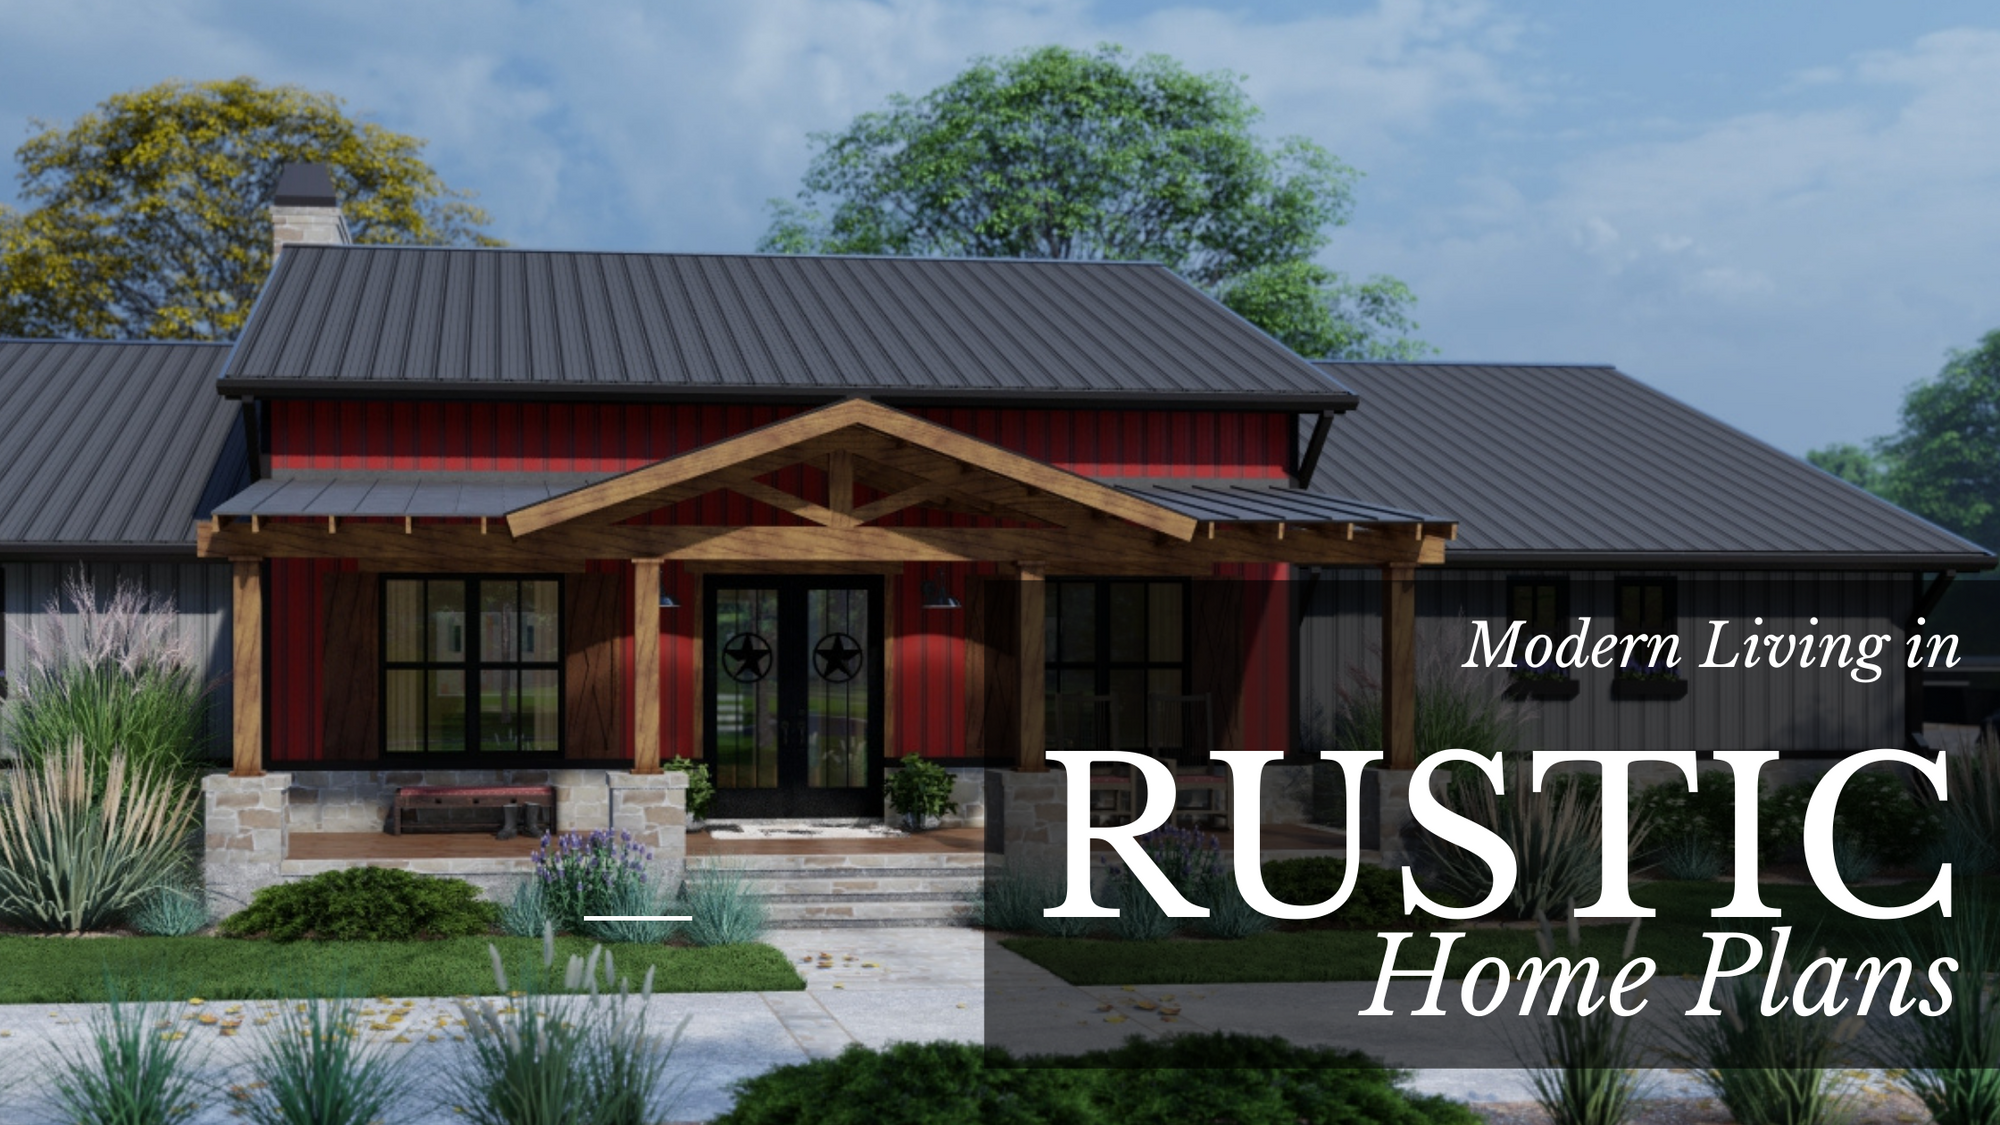 Modern Living in Rustic Home Plans